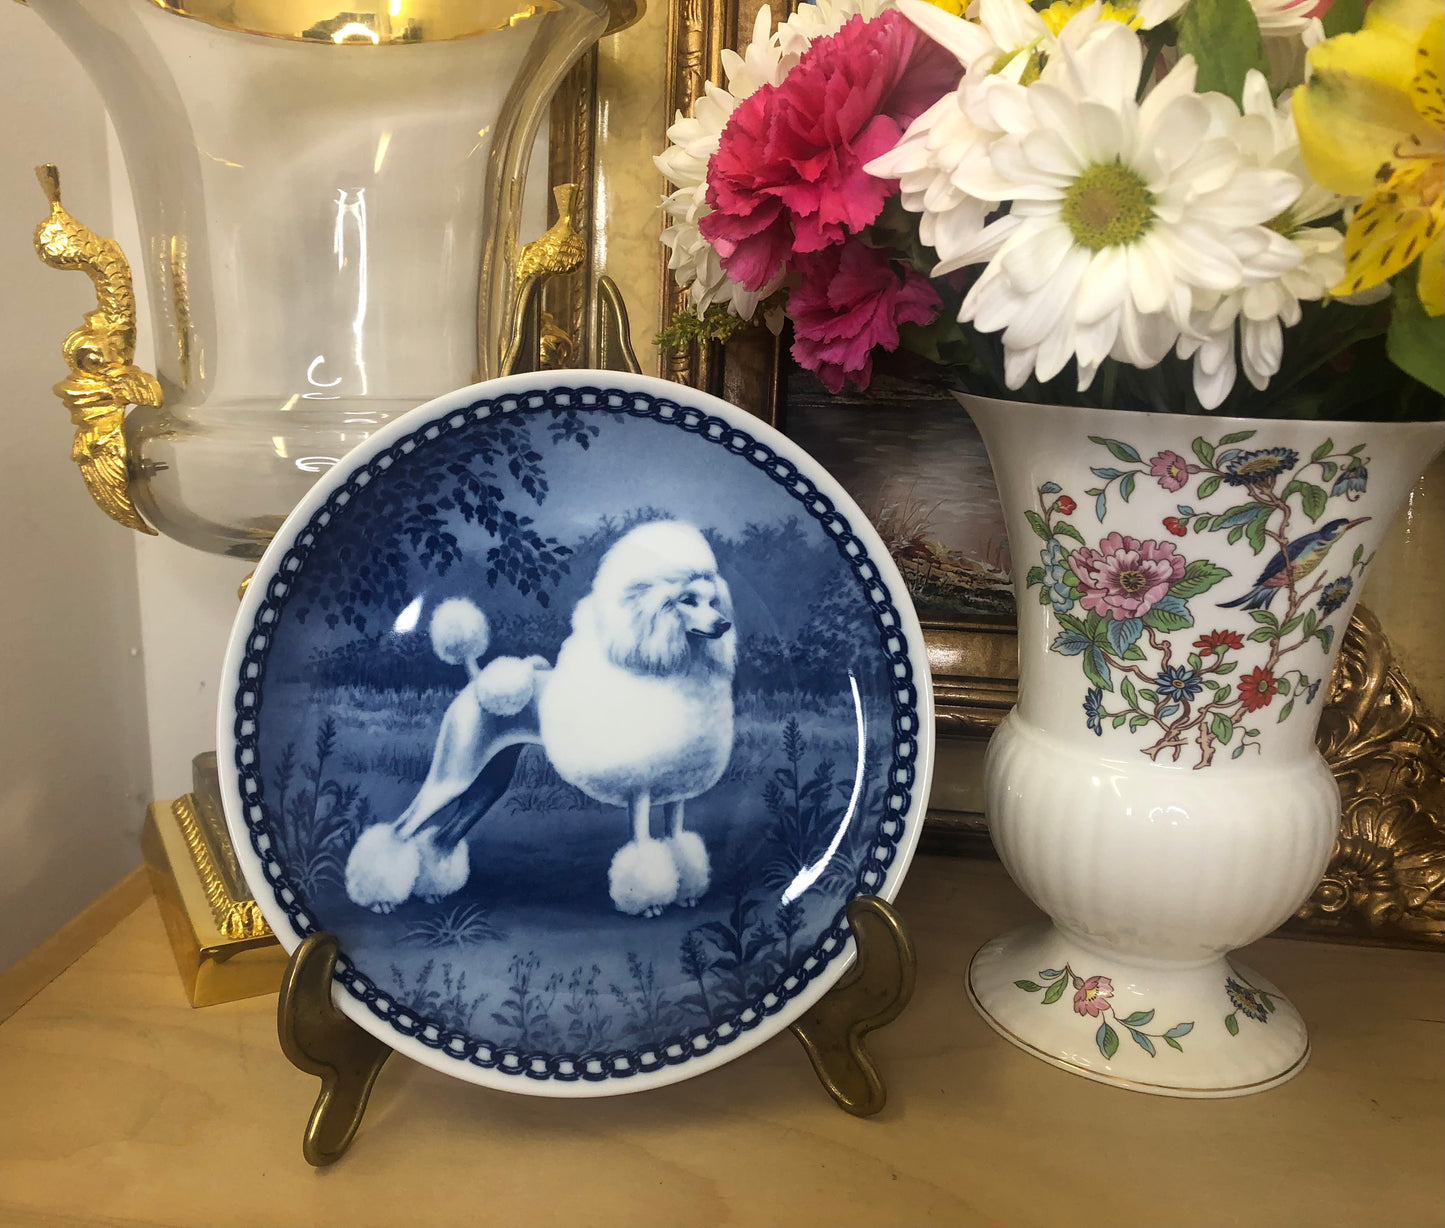 Vintage Poodle Collectible Hundeplatte blue and white - Pristine!